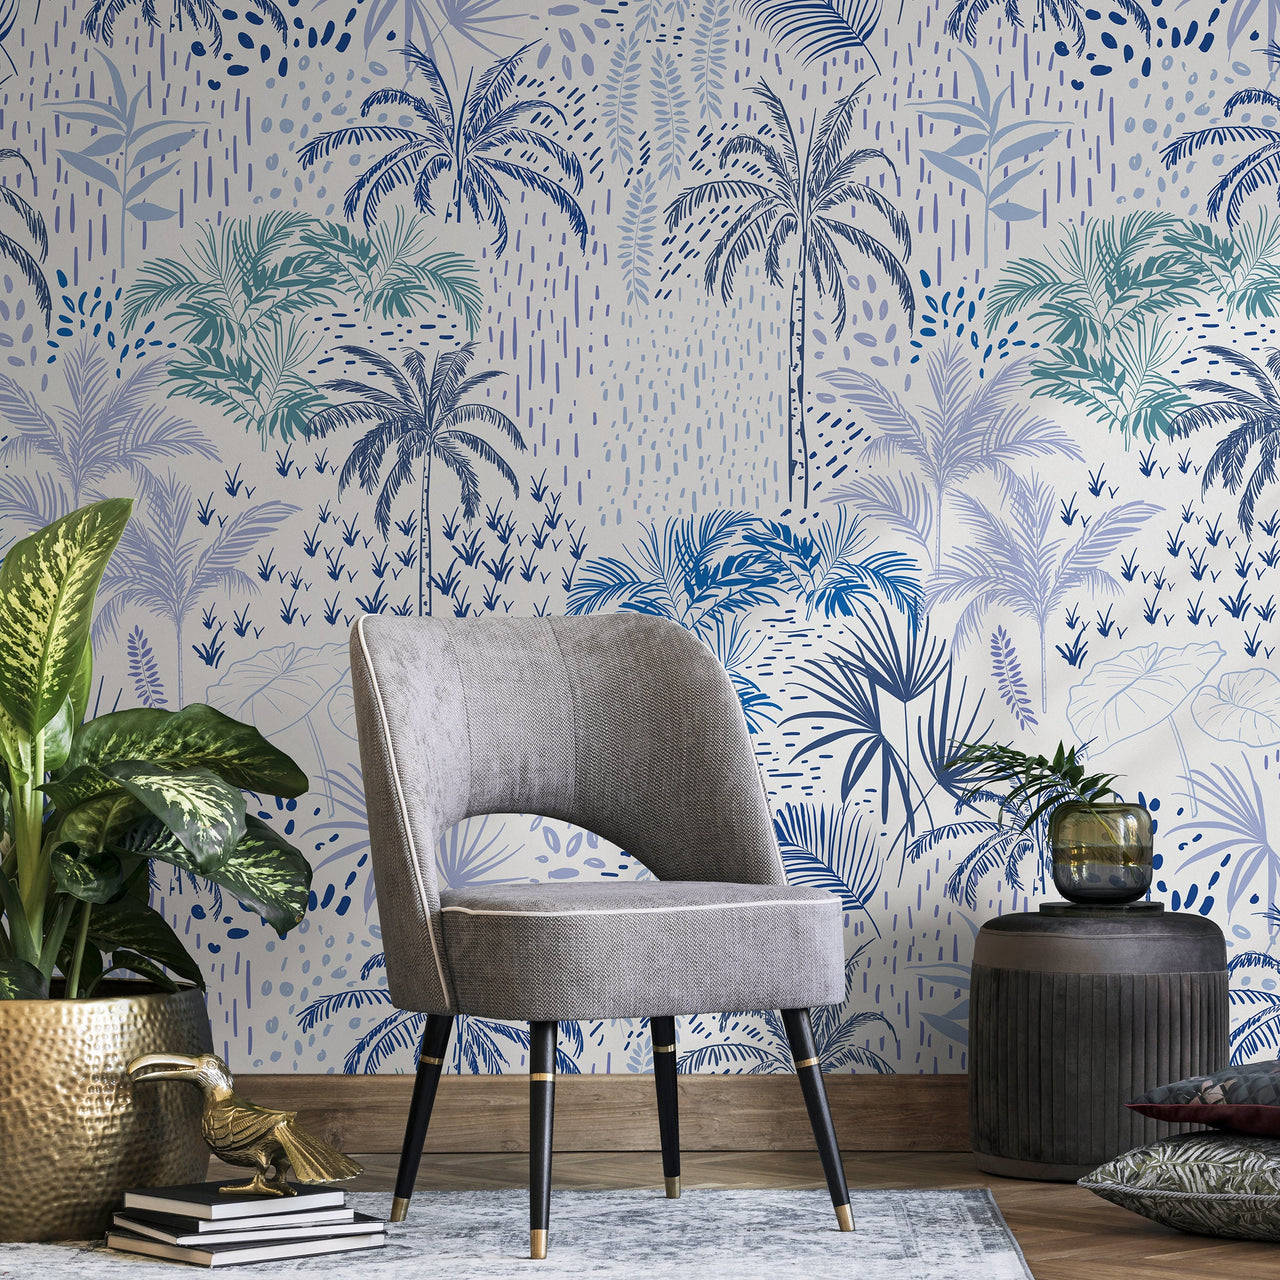 Wallpaper Peel and Stick Wallpaper Removable Wallpaper Home Decor Wall Art Wall Decor Room Decor / Blue Tropical Palm Tree Wallpaper - B089